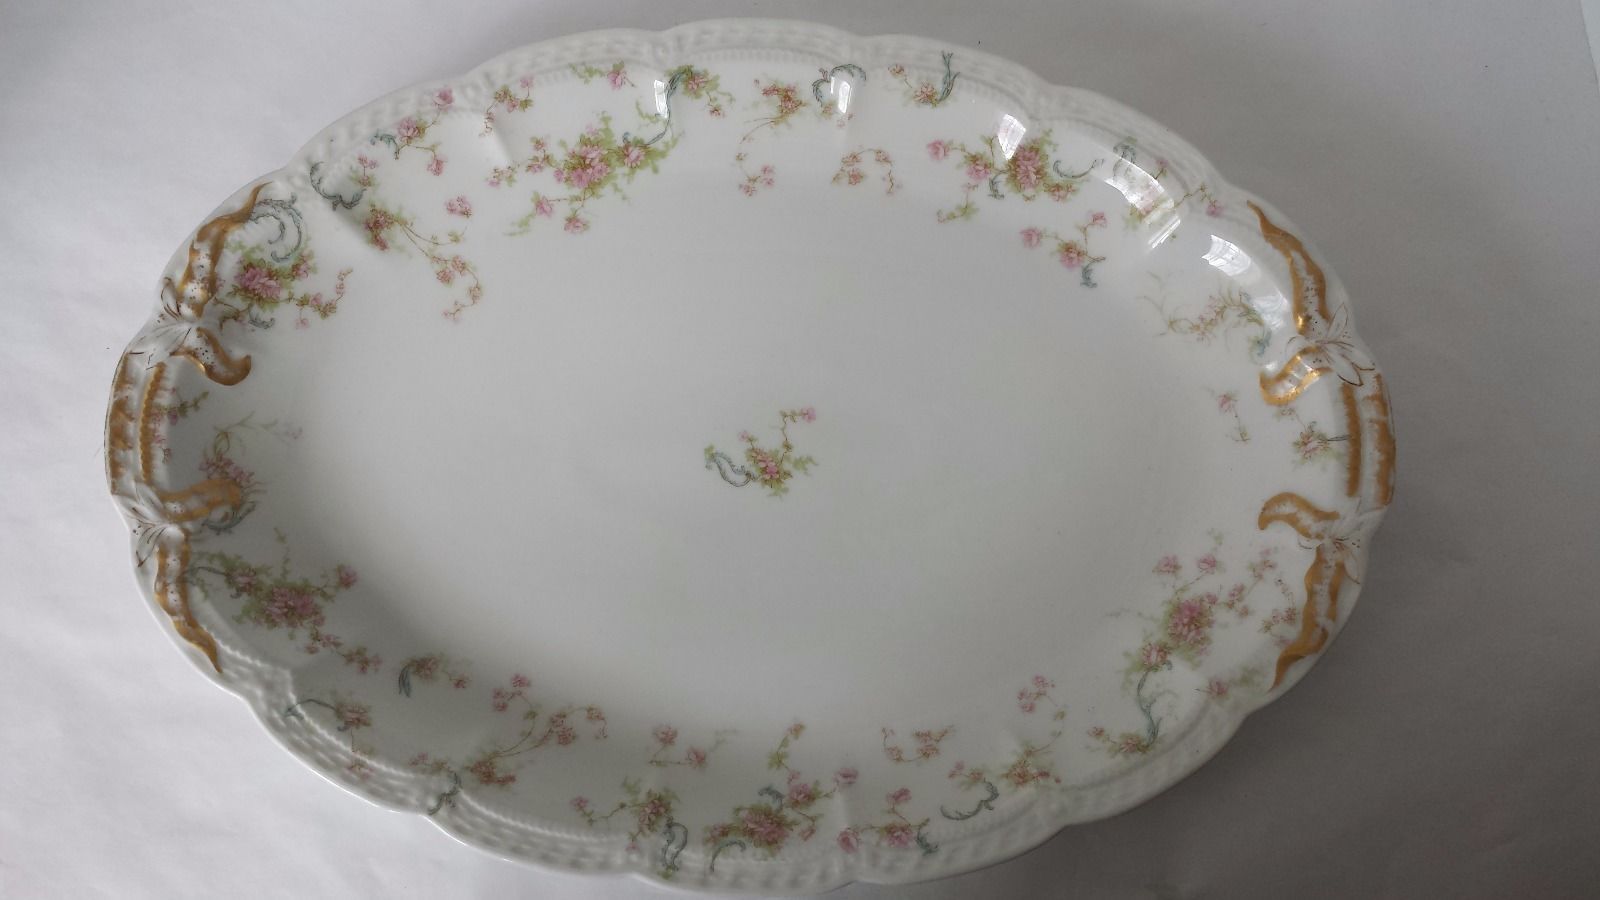 VINTAGE 11 1/4" OVAL PLATTER SCALLOPED GOLD TRIM YELLOW BLUE PINK FLOWERS